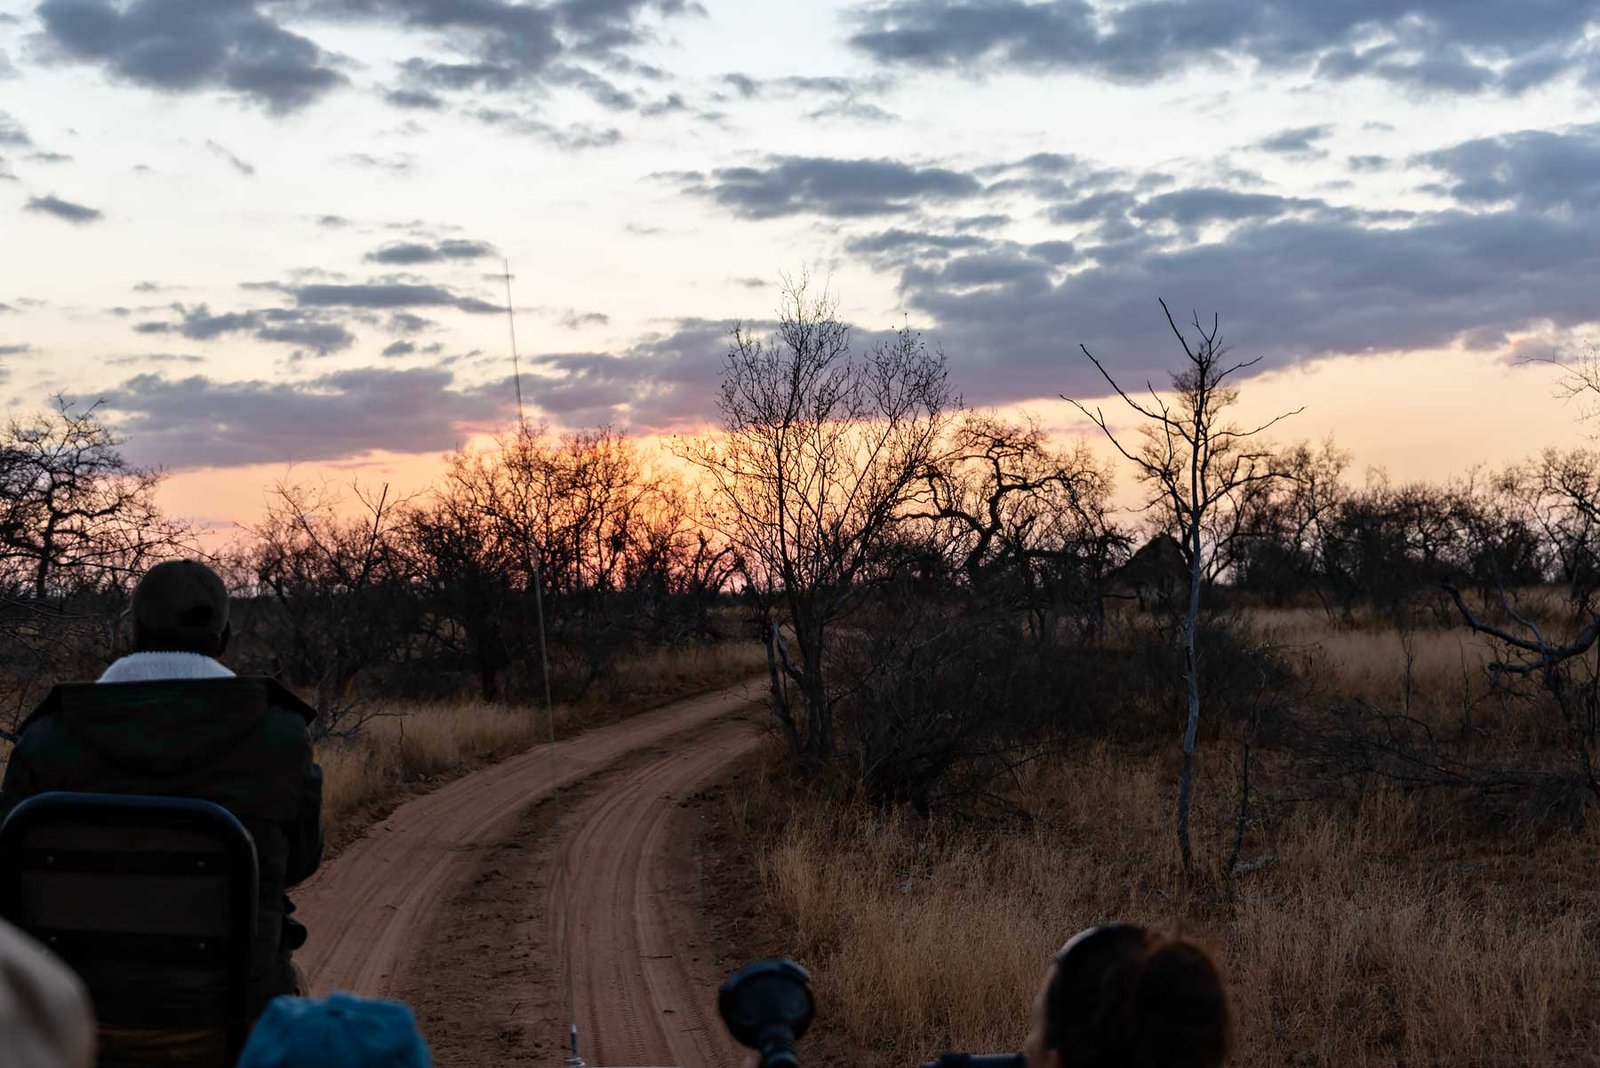 Sunset Game Drive in South Africa - - Check out my review of staying at Klaserie Sands River Camp, a beautiful boutique (4 suites), luxury safari lodge in Greater Kruger (Big 5), South Africa